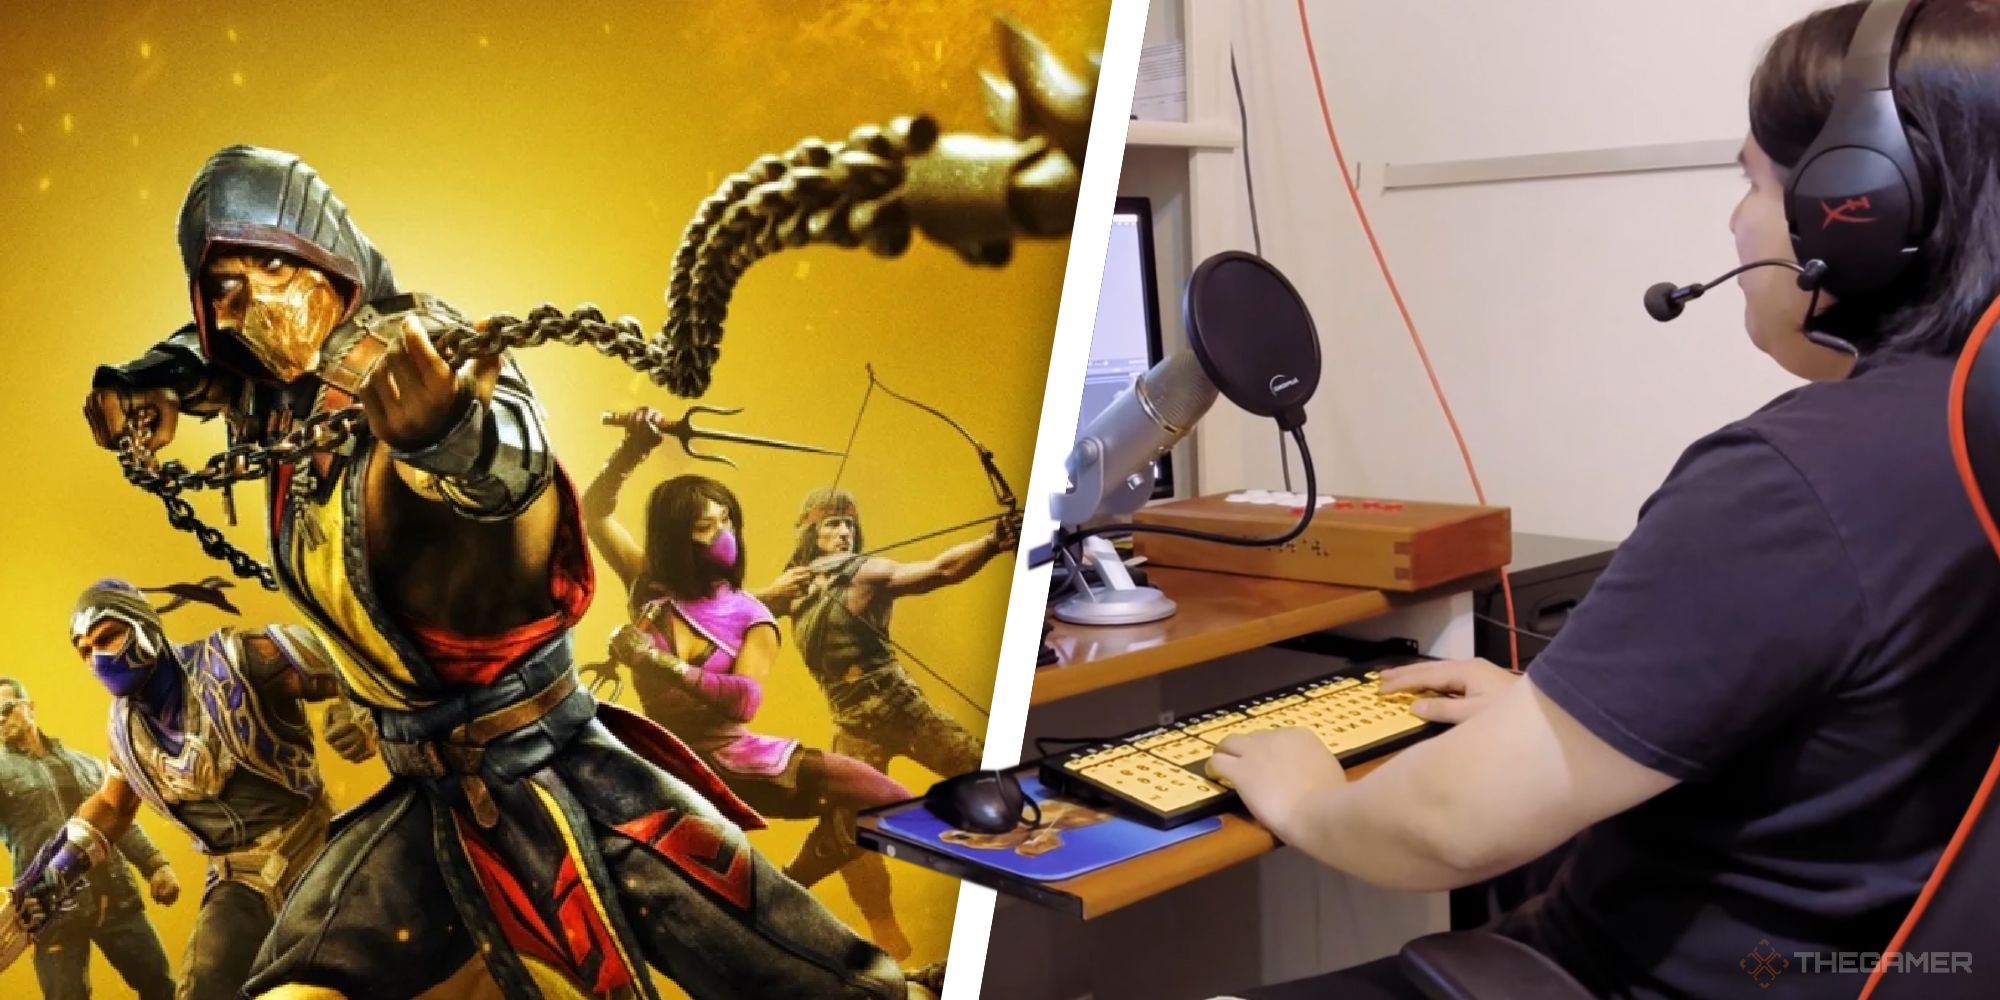 Left: An image of Mortal Kombat 11, featuring Scorpion using his spear move. Right: a streamer plays video games at a PC